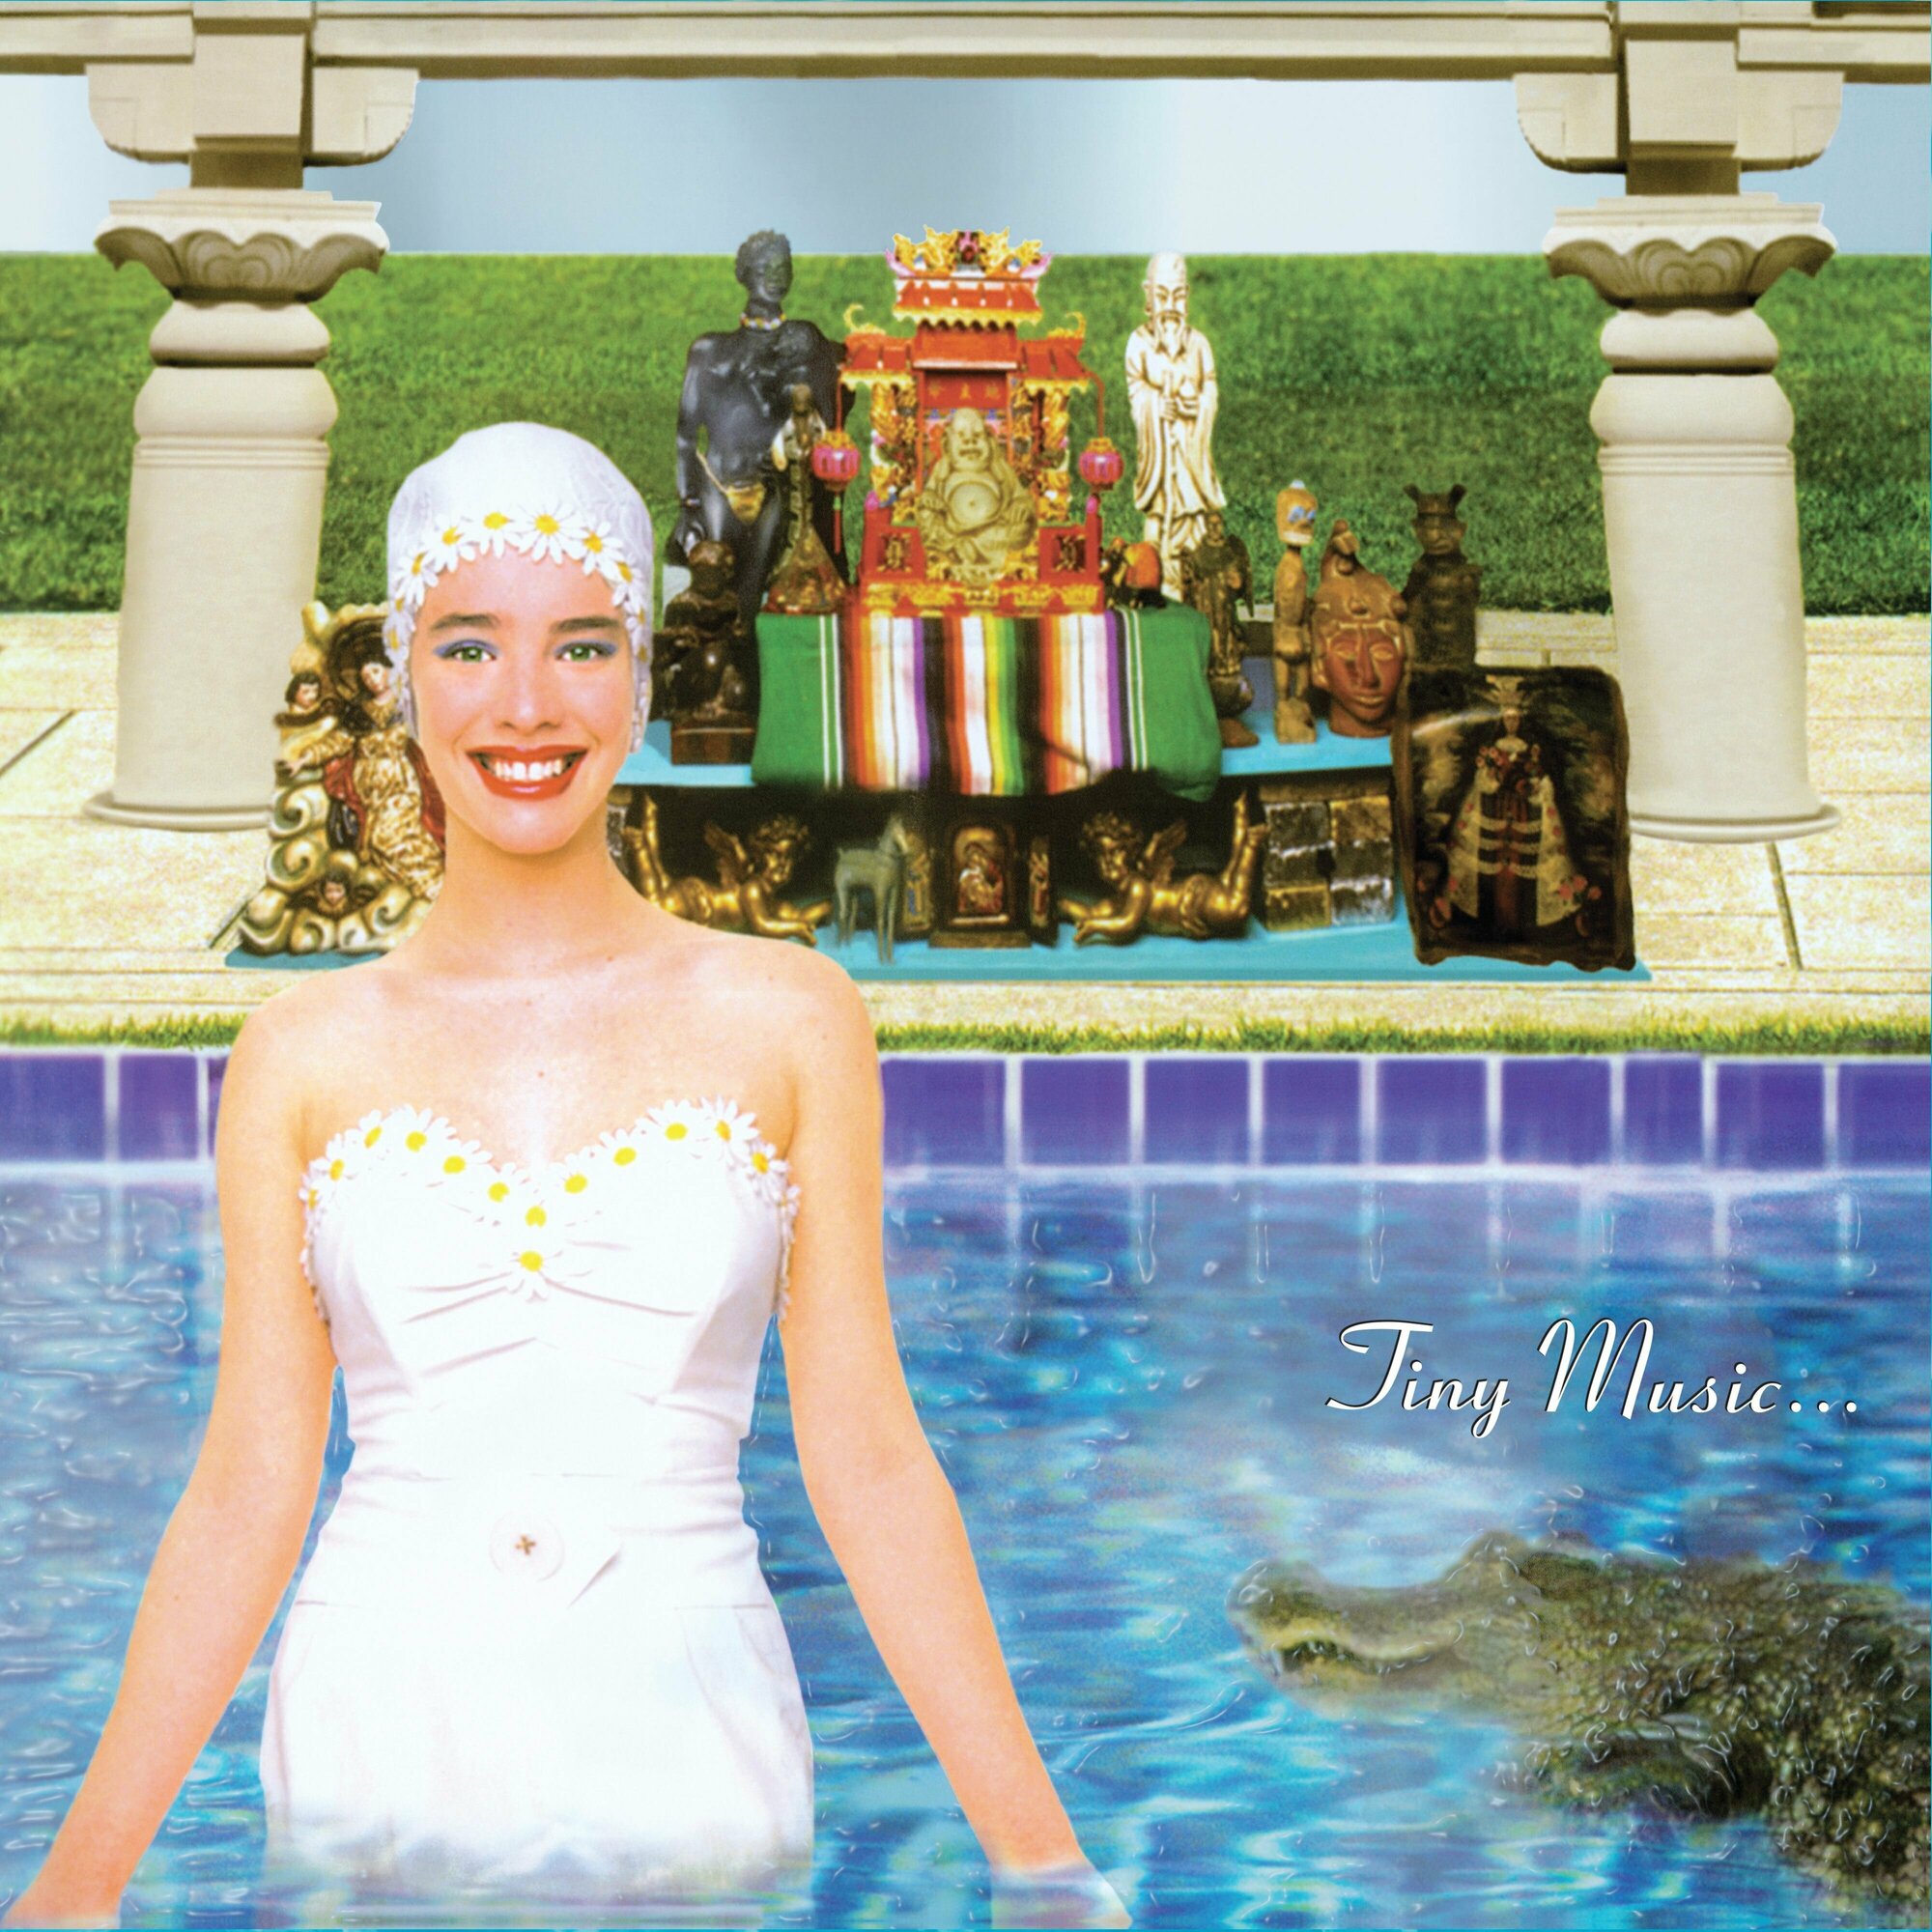 Stone Temple Pilots Stone Temple Pilots - Tiny Music…songs From The Vatican Gift Shop (lp + 3 Cd, 180 Gr) Мистерия звука - фото №1